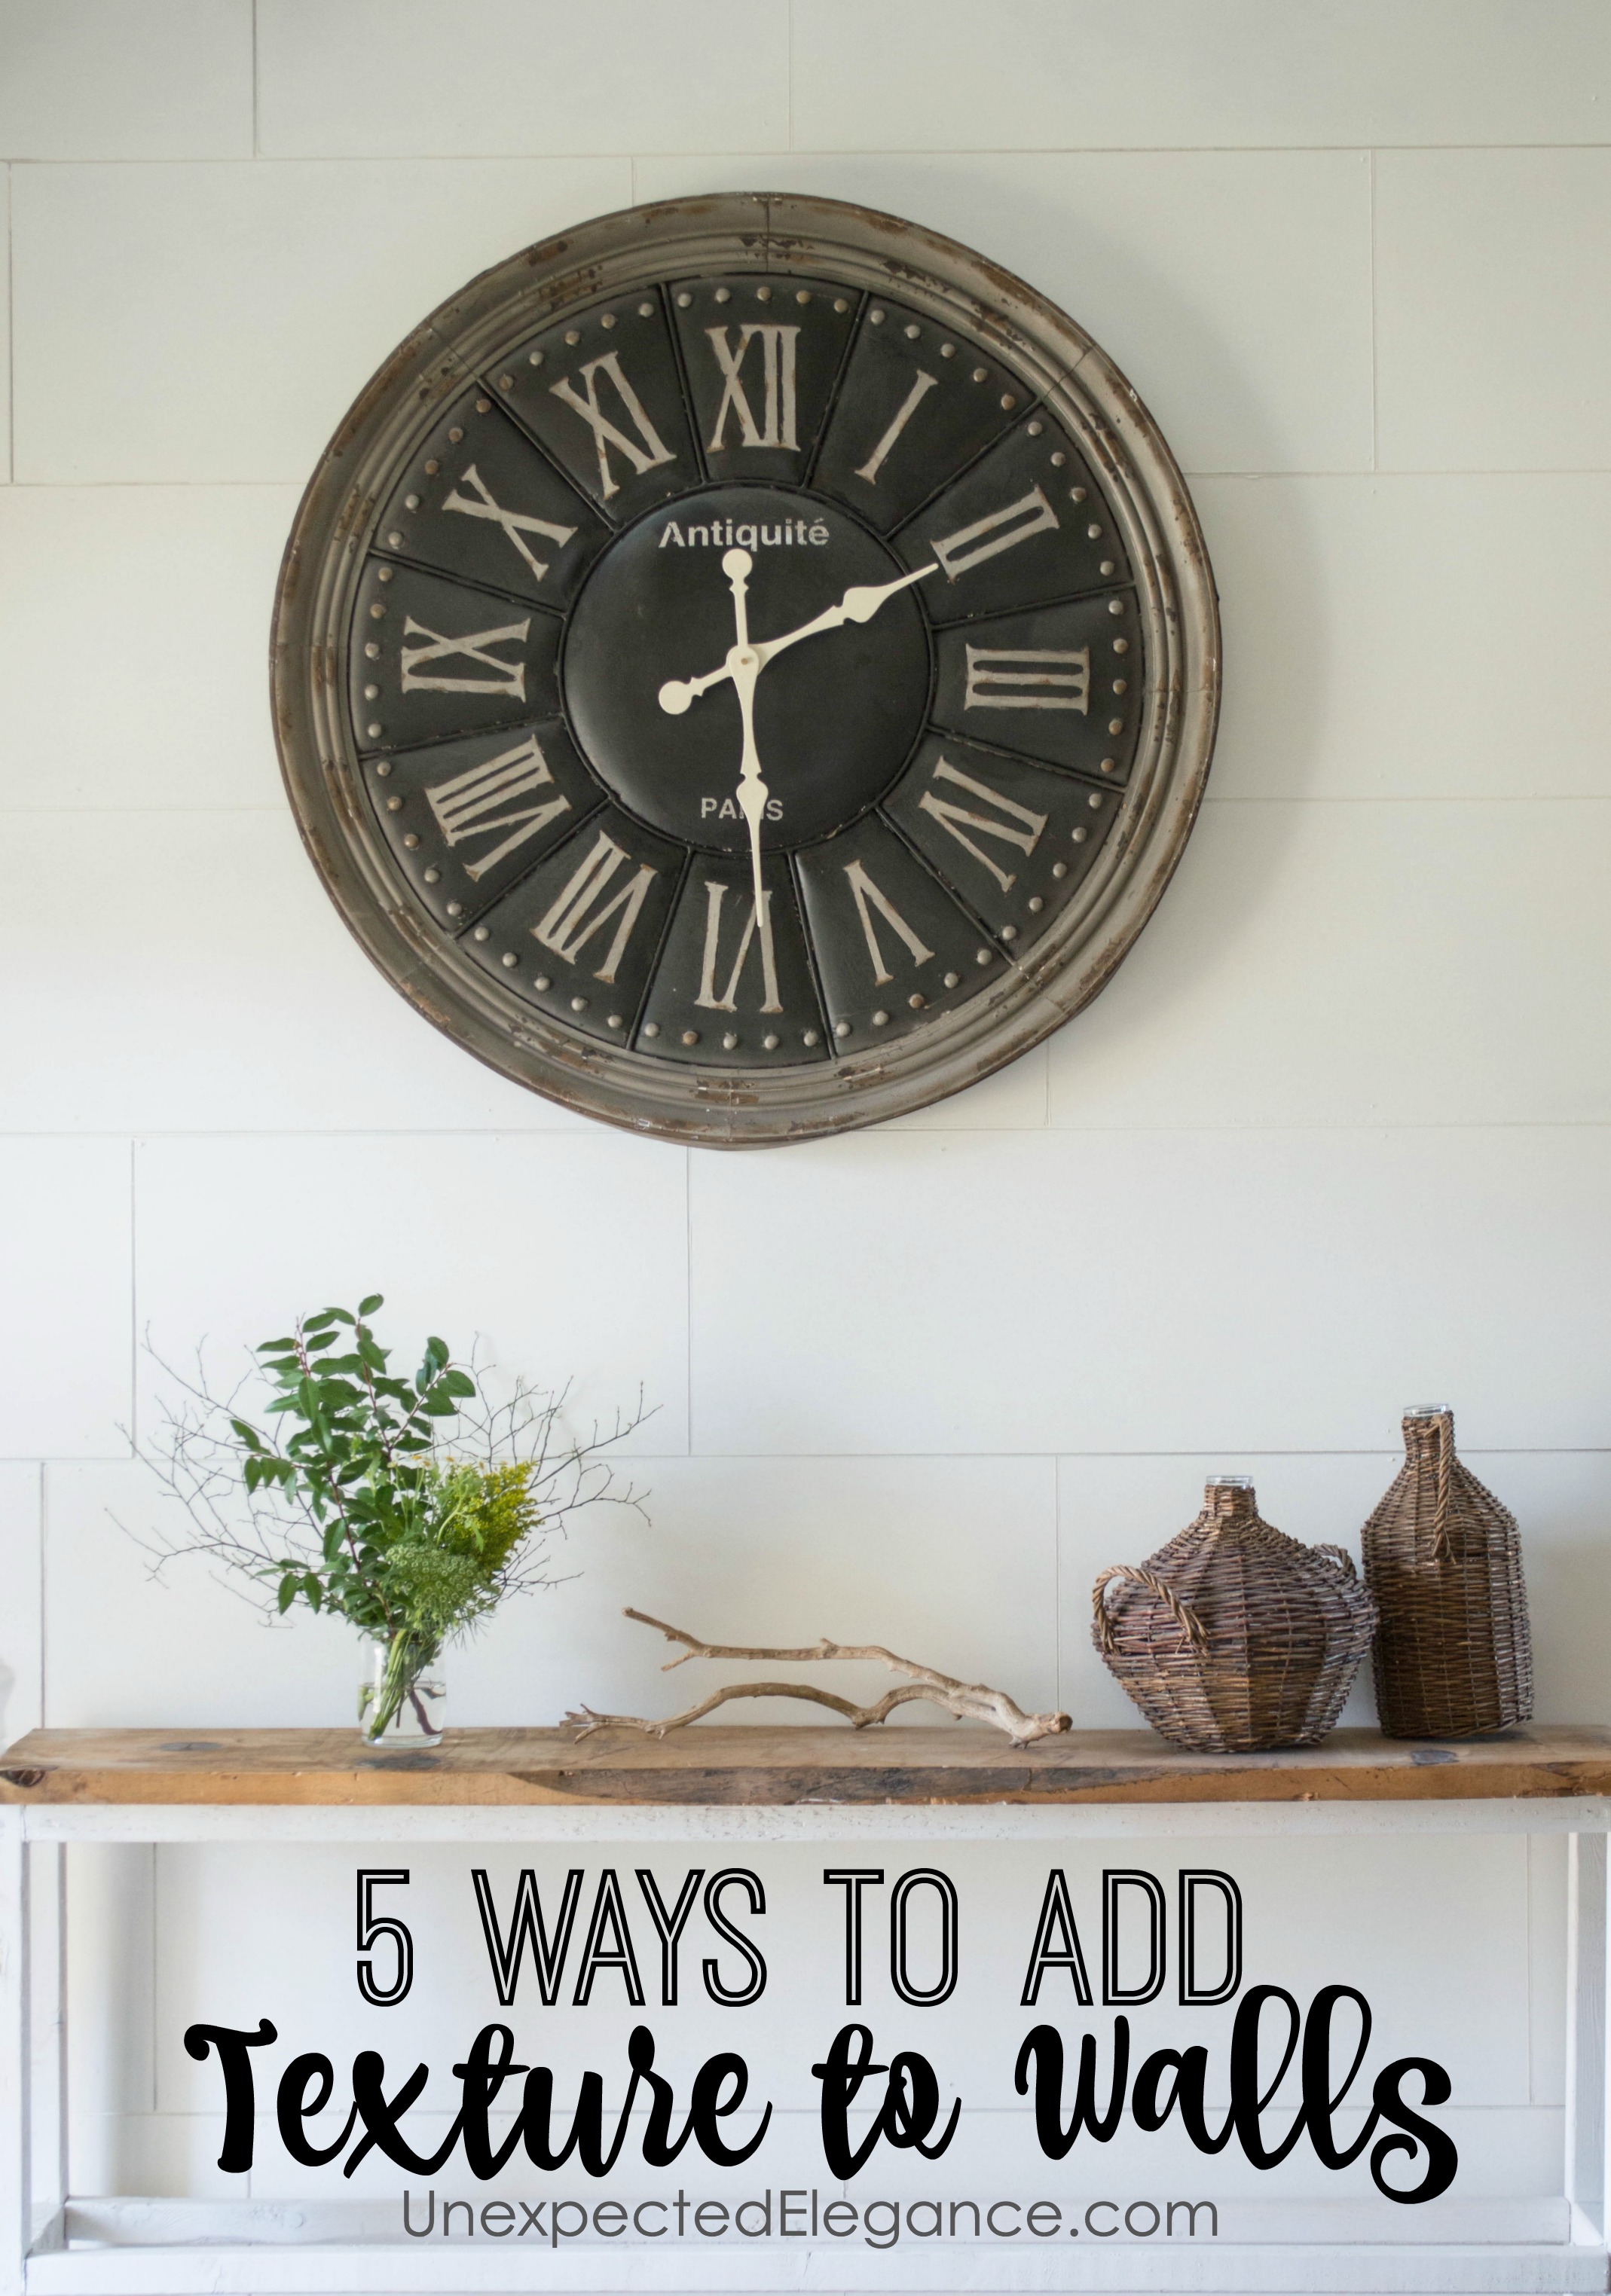 Texture creates interest in a room and can make it more cozy. Check out these 5 ways to add texture to walls!